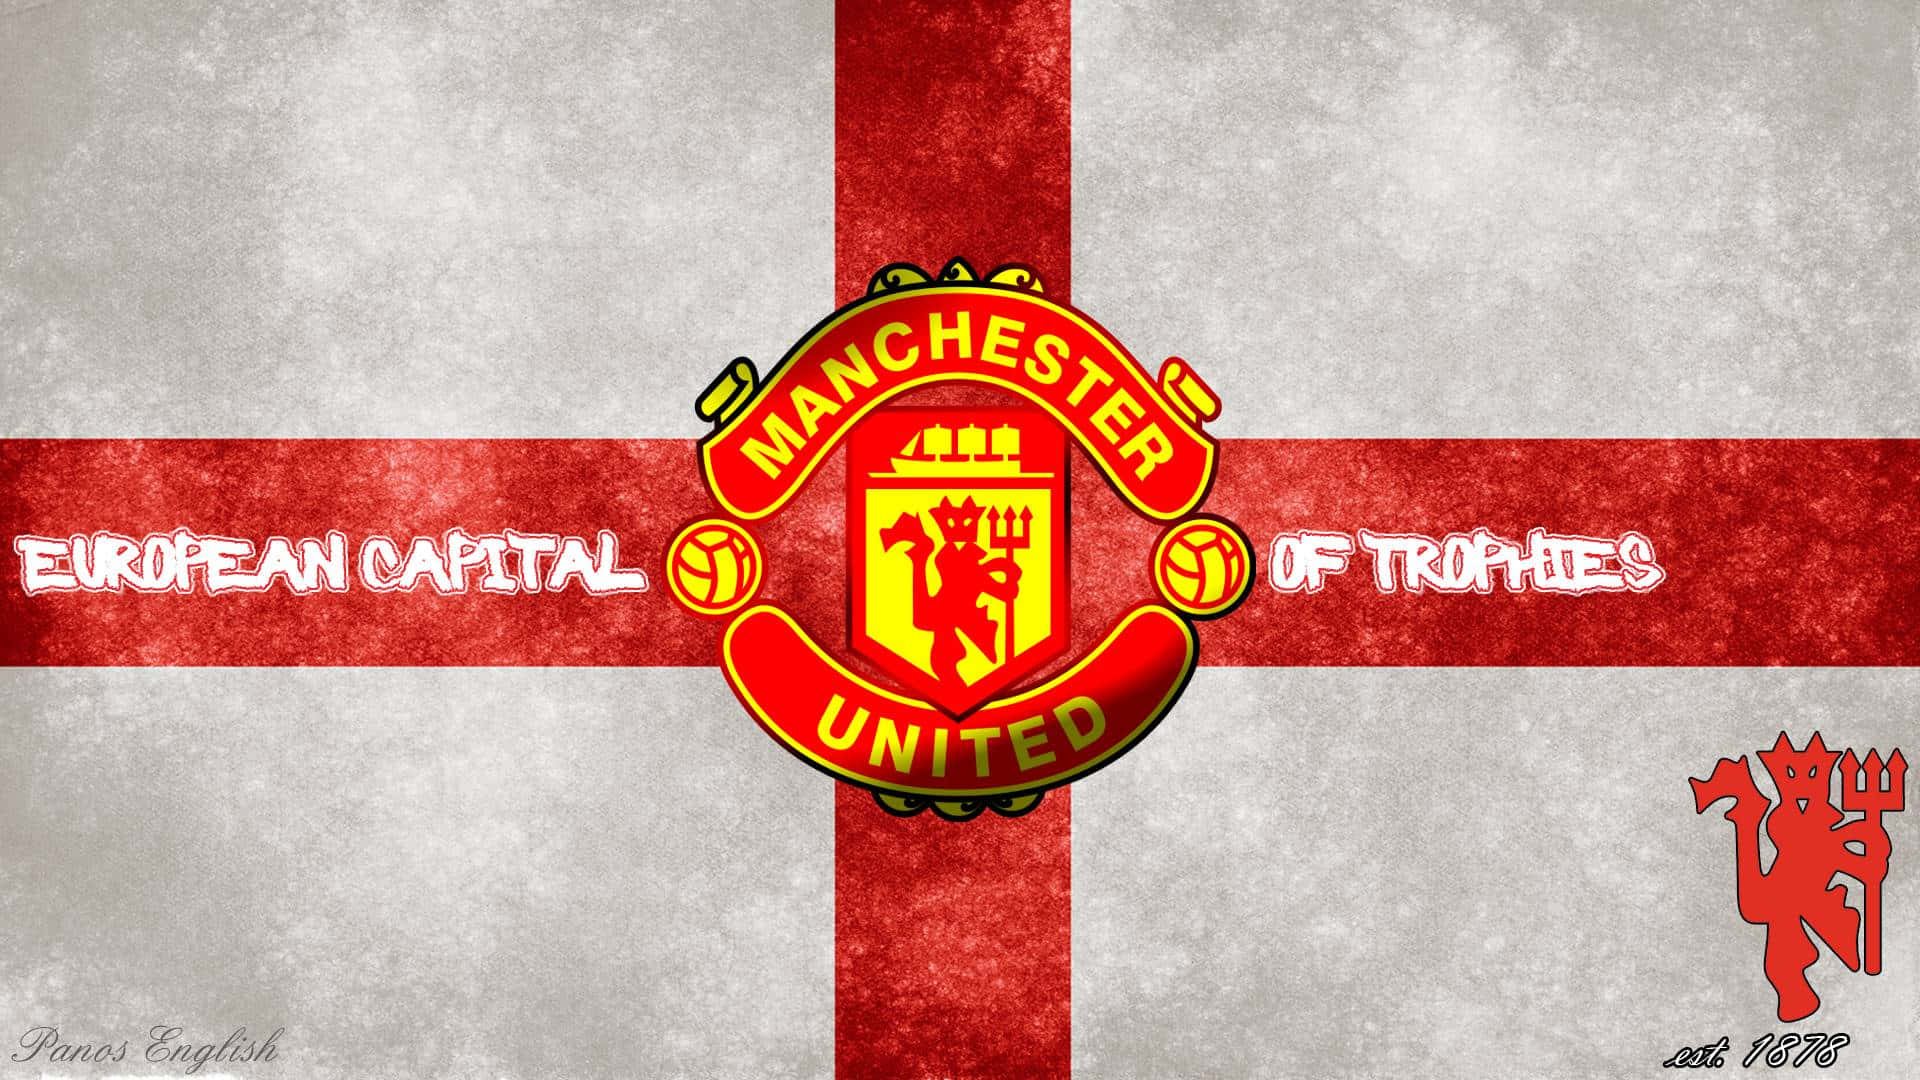 Manchester United FC - The Best Football Club In The World